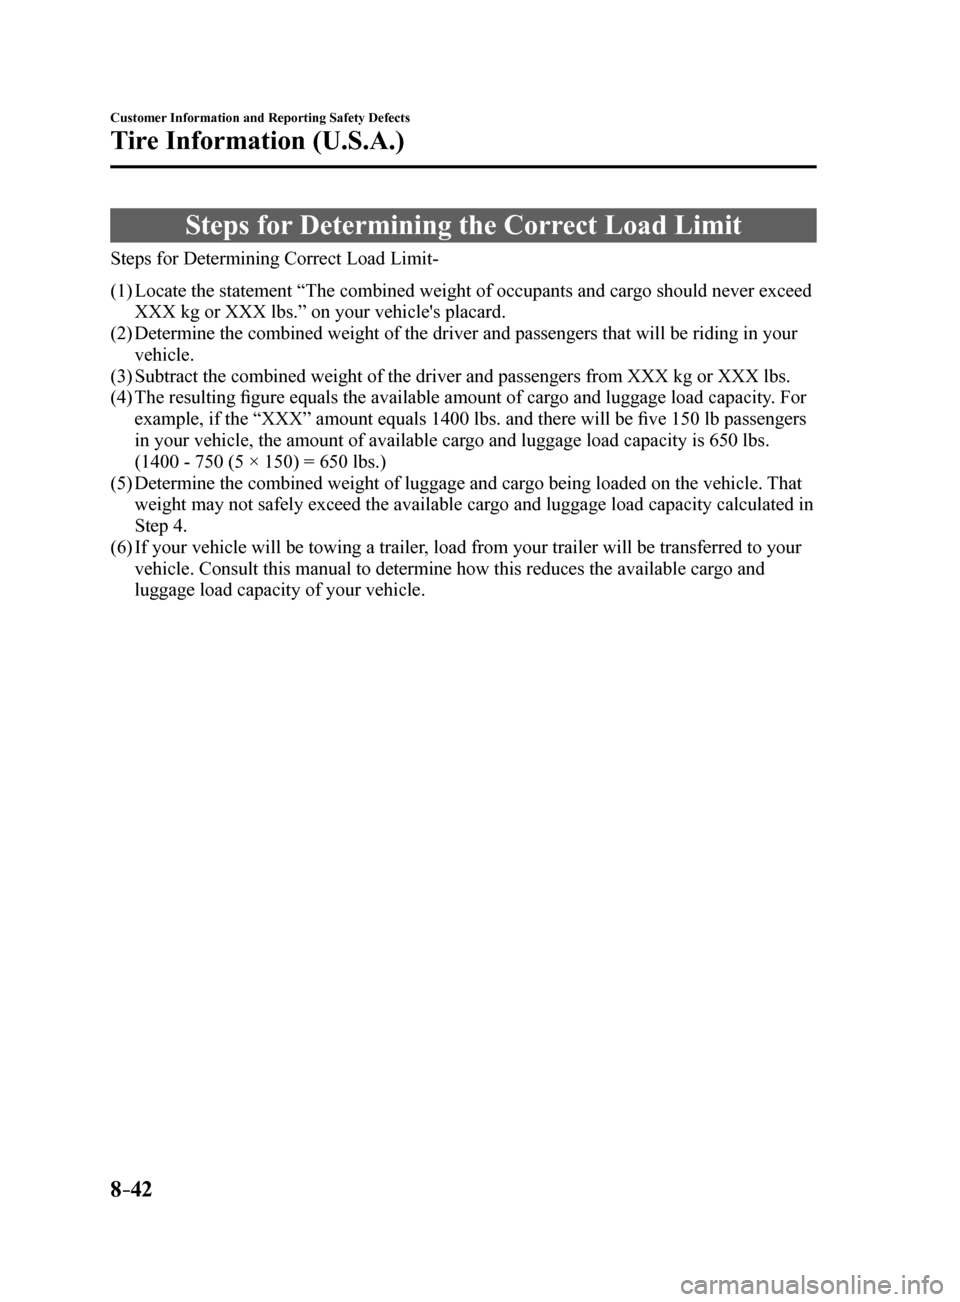 MAZDA MODEL 6 2017  Owners Manual (in English) 8–42
Customer Information and Reporting Safety Defects
Tire Information (U.S.A.)
Steps for Determining the Correct Load Limit
Steps for Determining Correct Load Limit-
(1) Locate the statement “Th